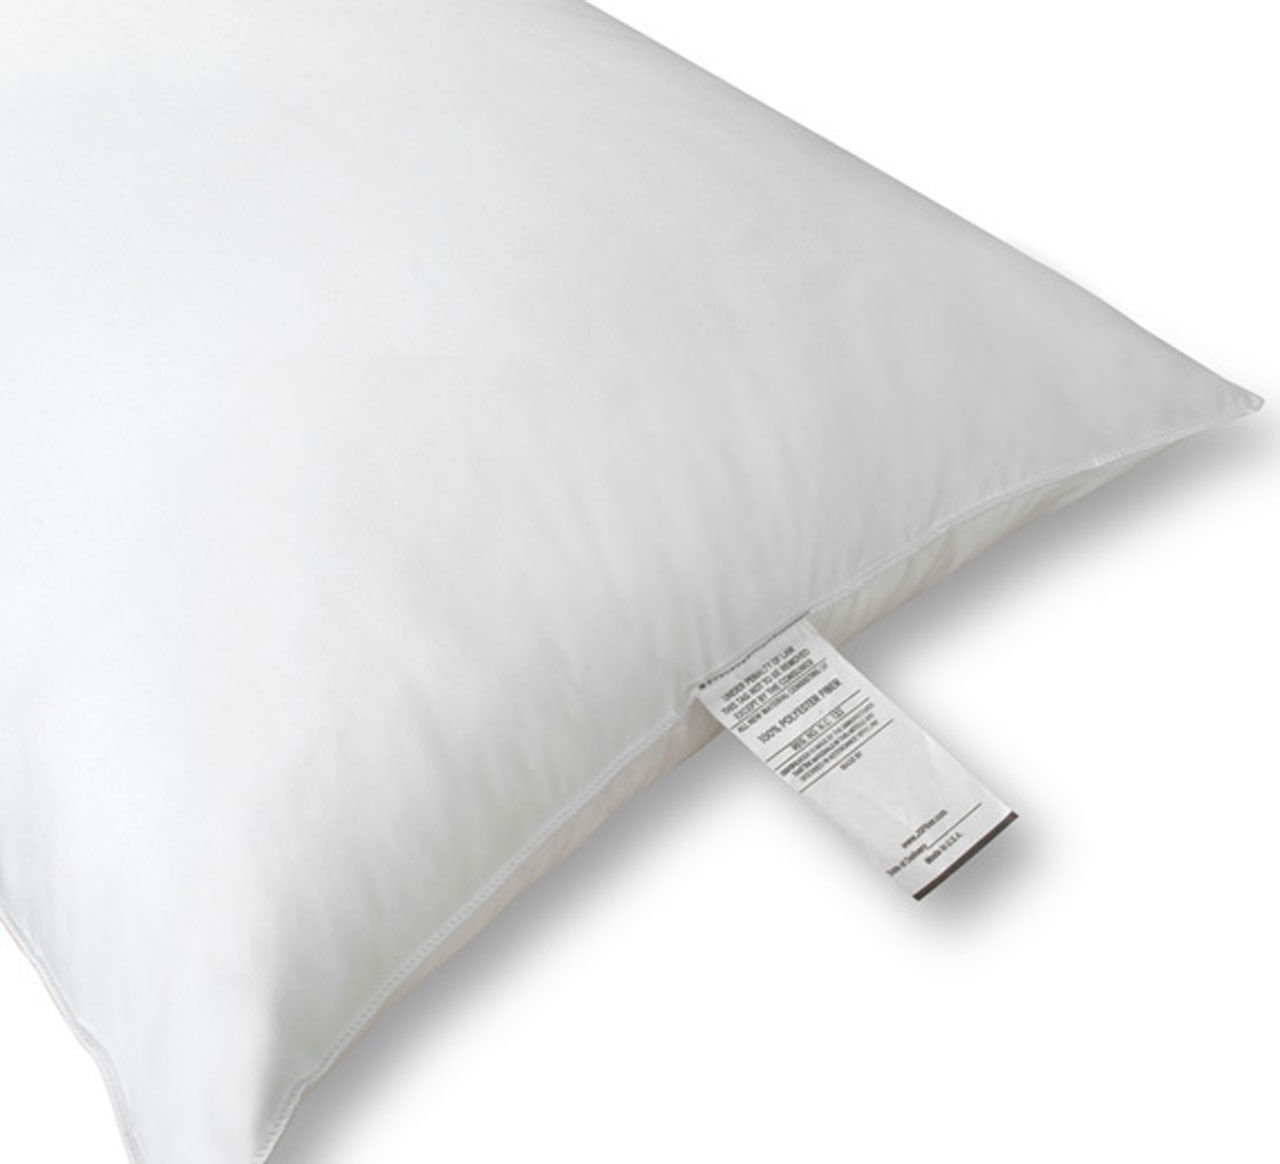 What sizes are available for RAMADA INN Pillows?